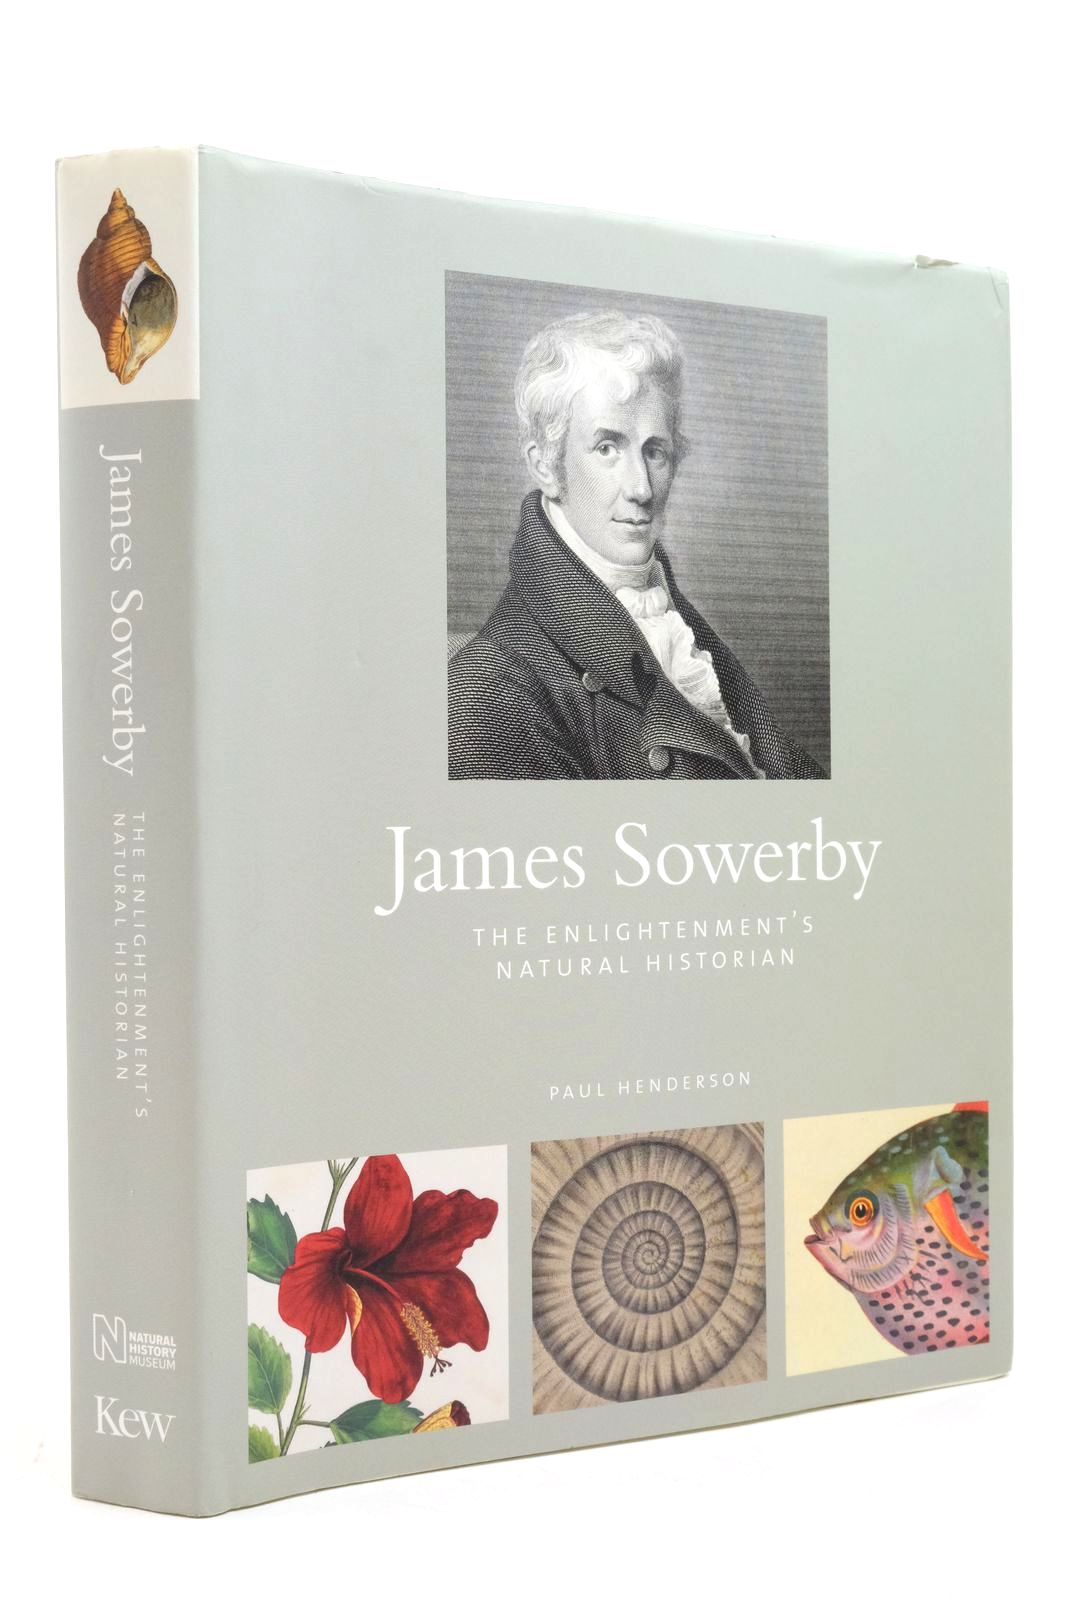 Photo of JAMES SOWERBY: THE ENLIGHTENMENT'S NATURAL HISTORIAN written by Henderson, Paul published by Royal Botanic Gardens (STOCK CODE: 2138904)  for sale by Stella & Rose's Books